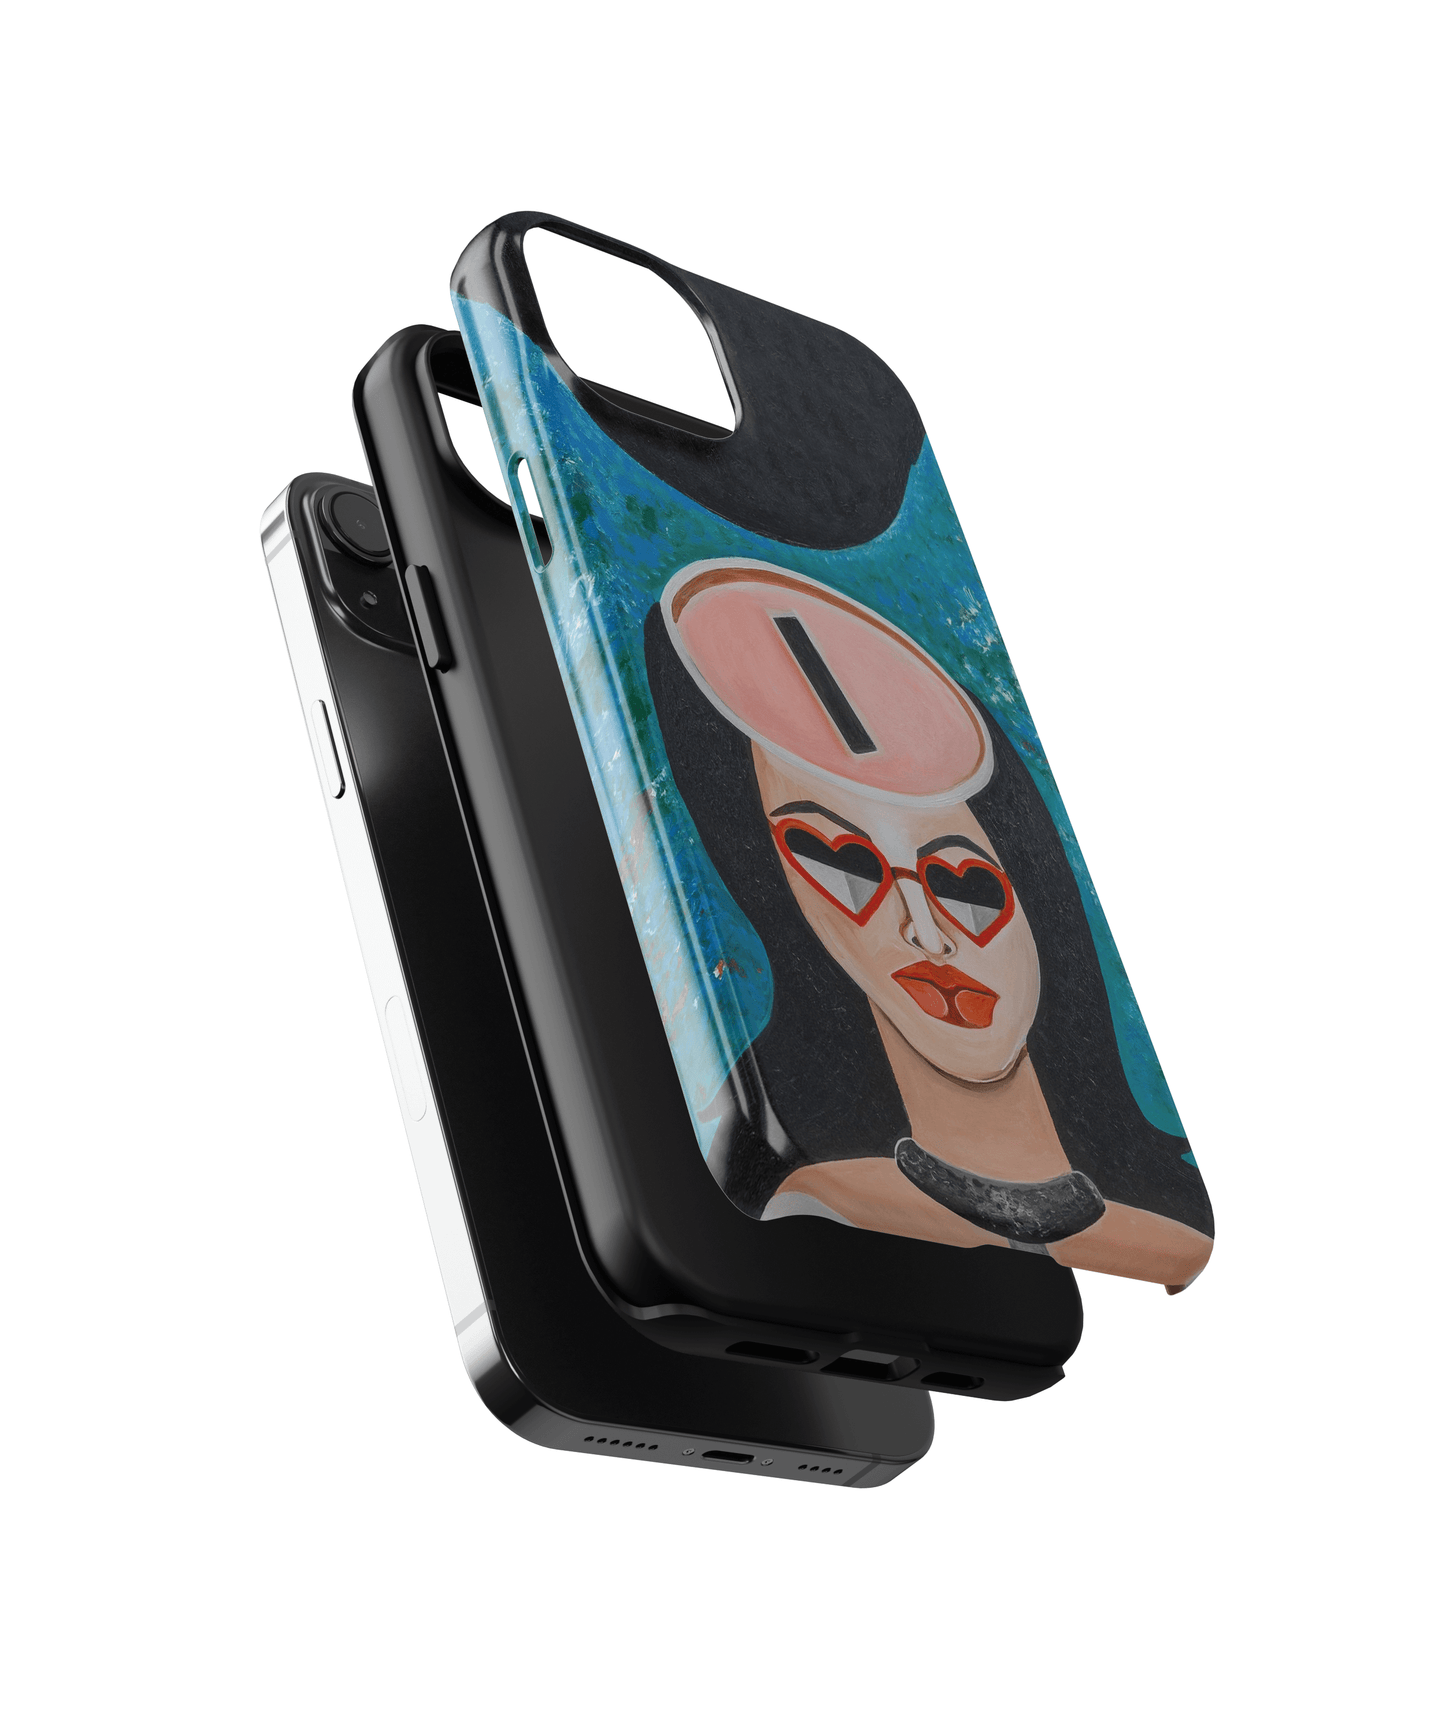 Materialiste - Huawei P20 Pro phone case